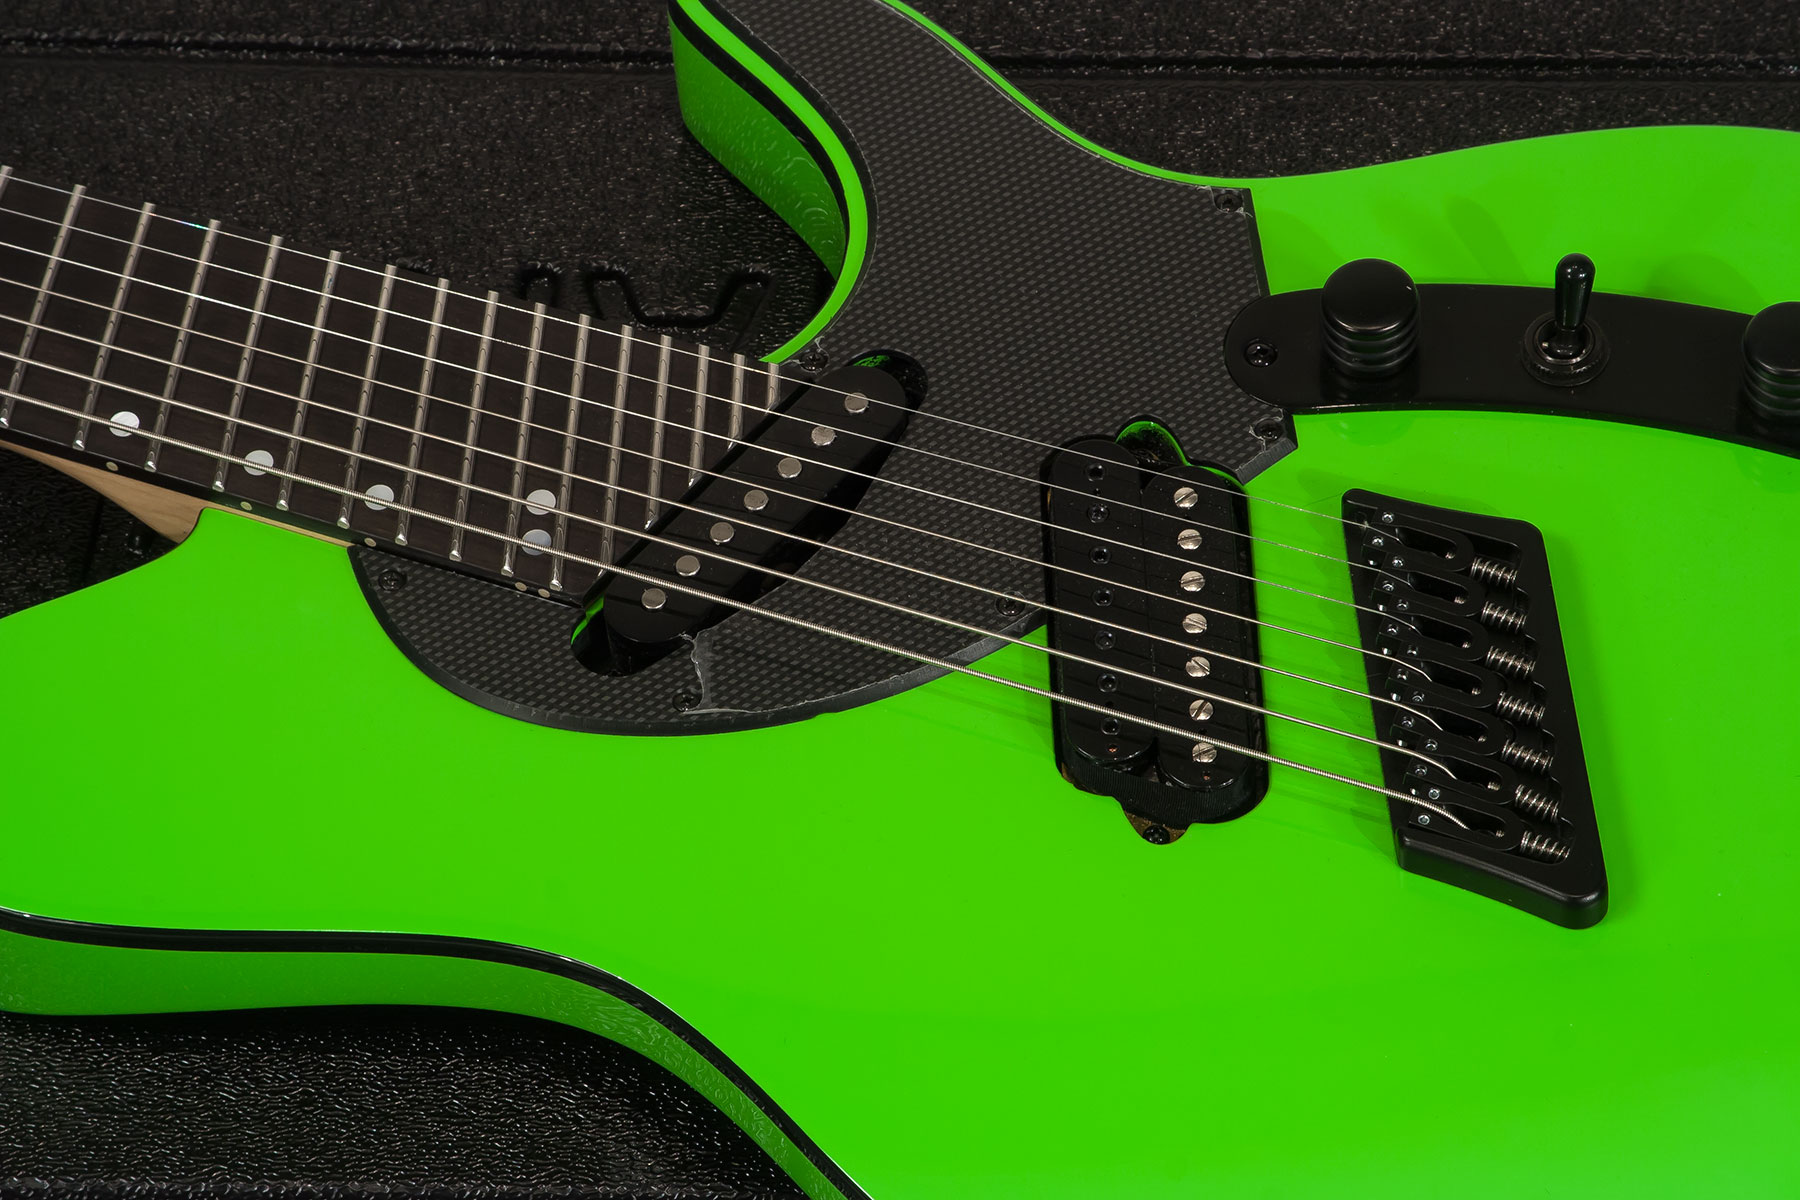 Ormsby Tx Gtr 7 Hs Ht Eb - Chernobyl Green - Guitare Électrique Multi-scale - Variation 2